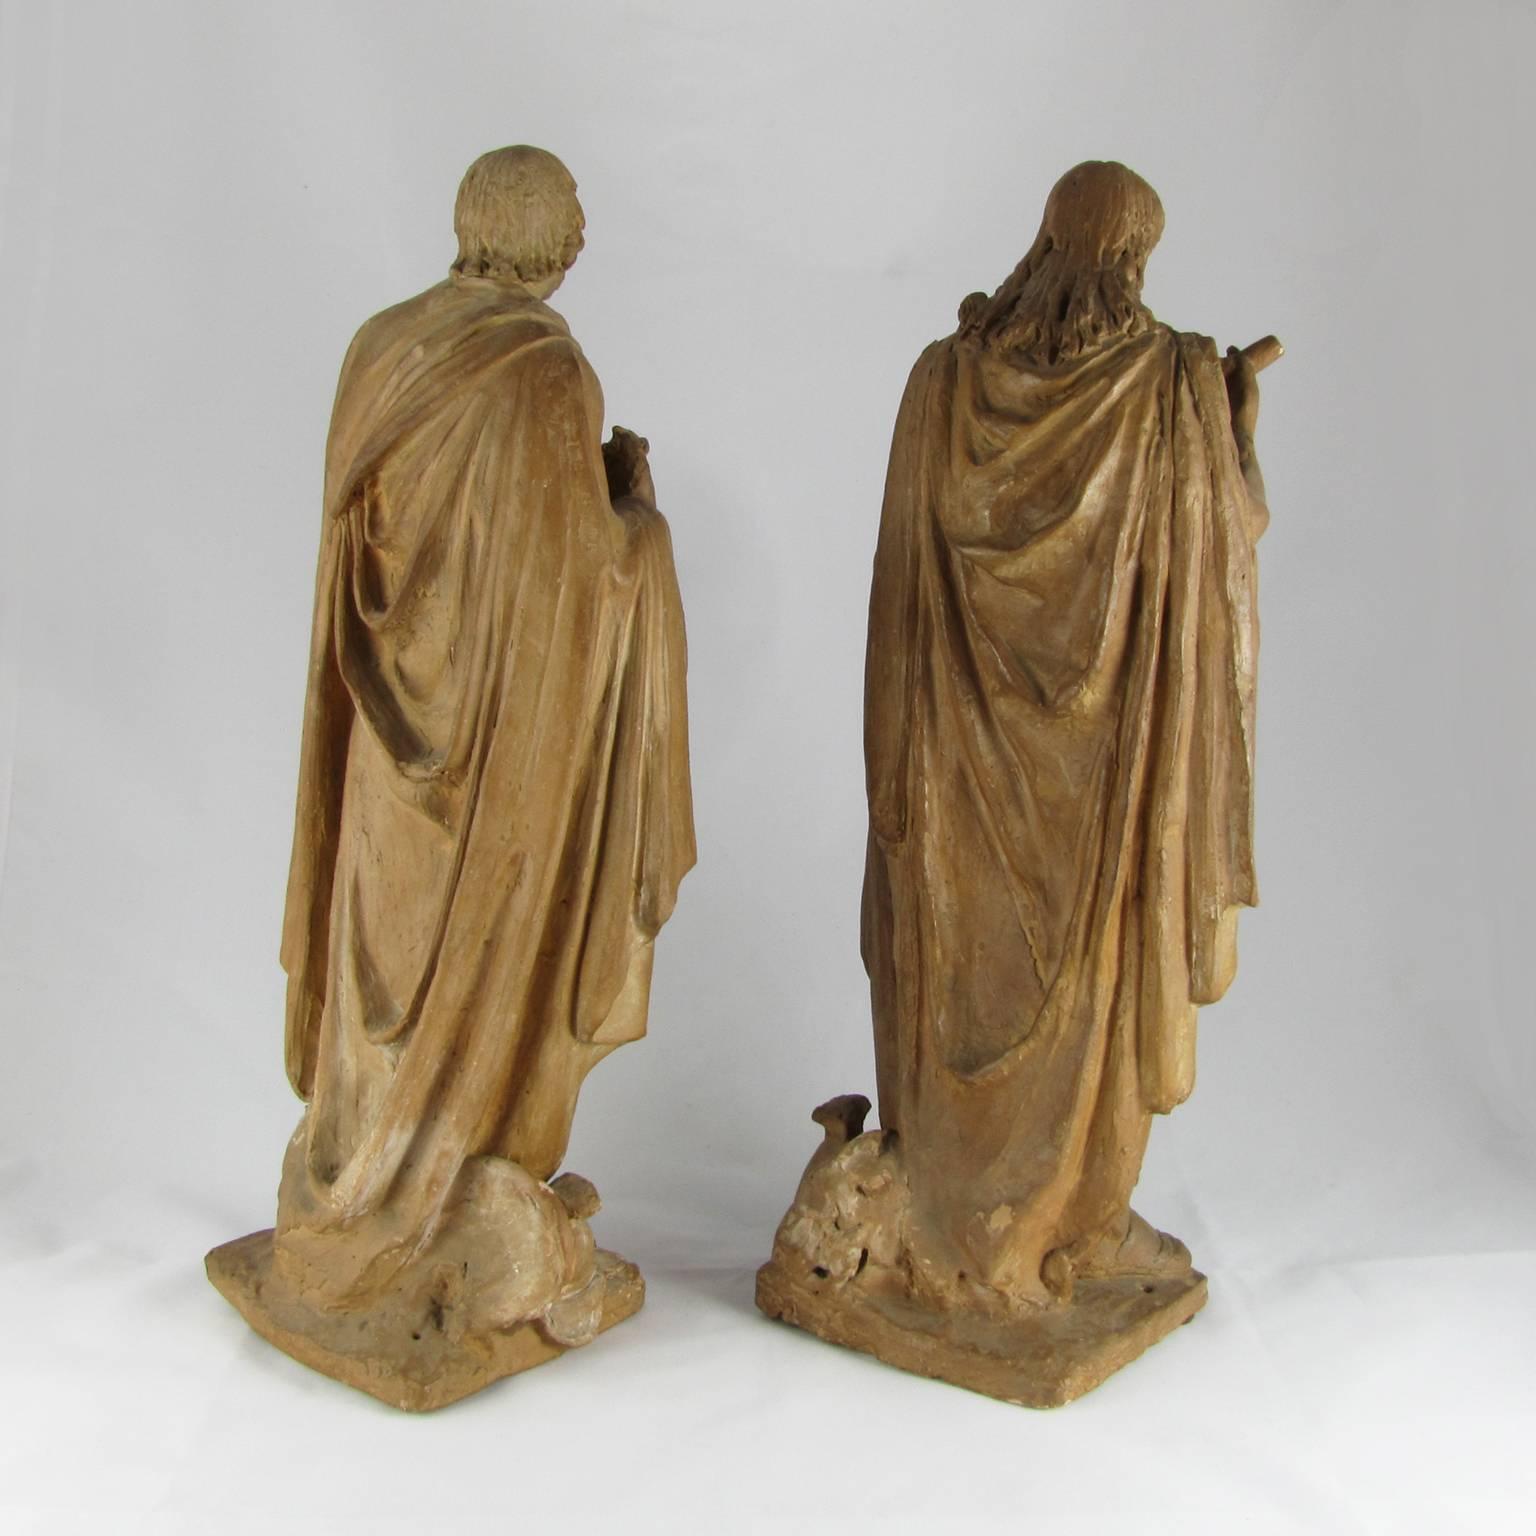 Two Early 18th Century Italian Unglazed Terracotta Sculptures Depicting Saints 1